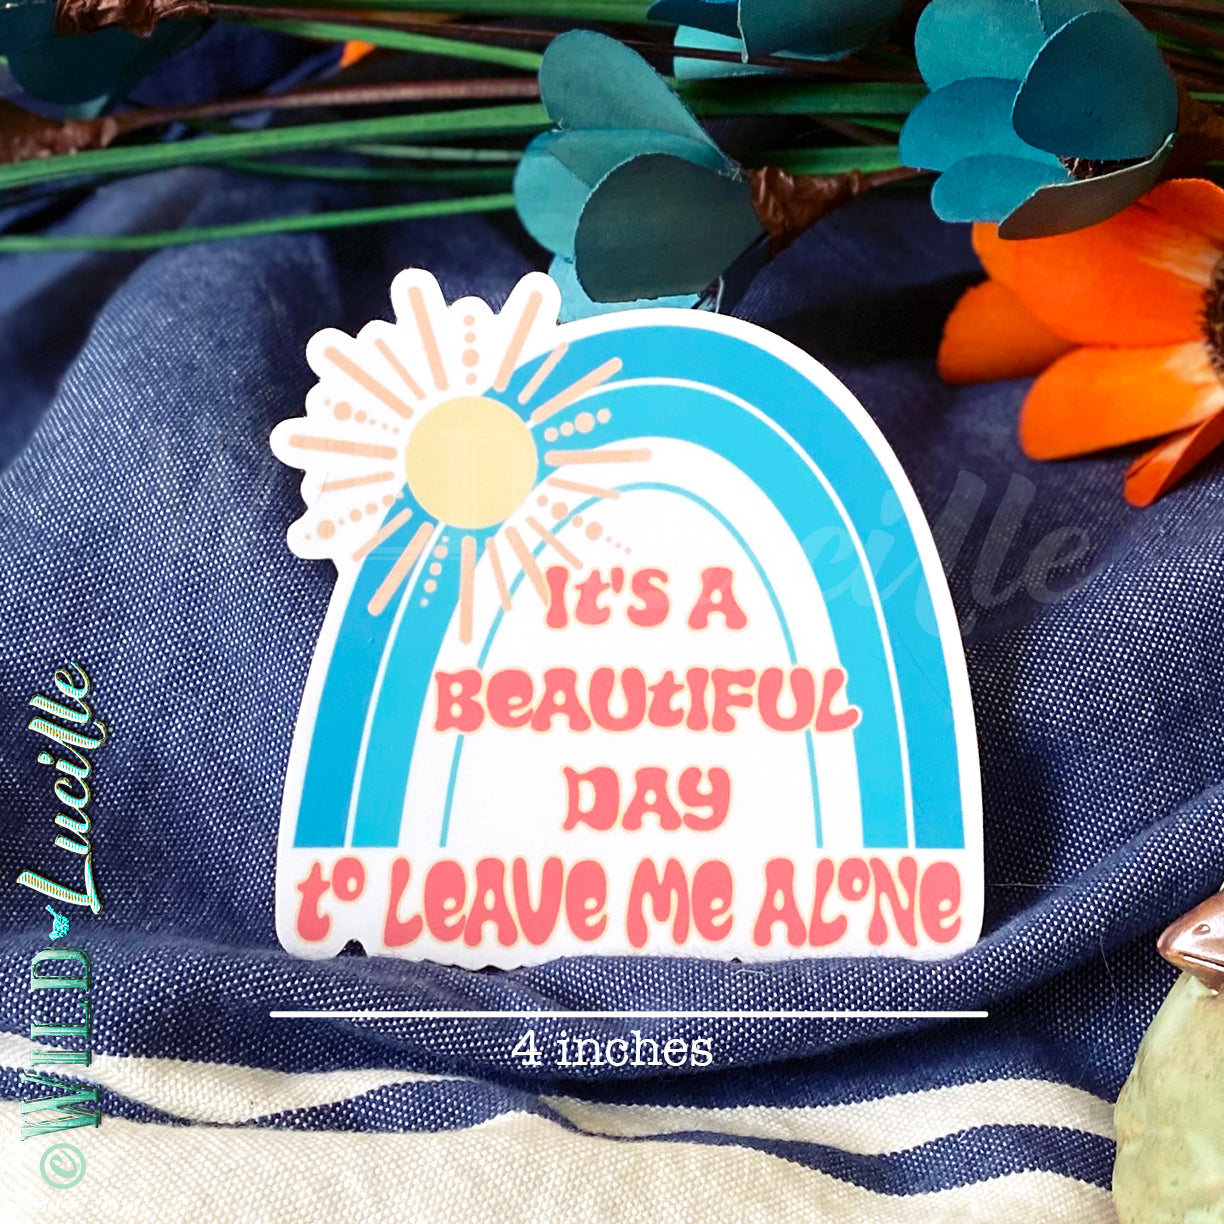 It's a Beautiful Day To Leave Me Alone - Jumbo Sassy Decal